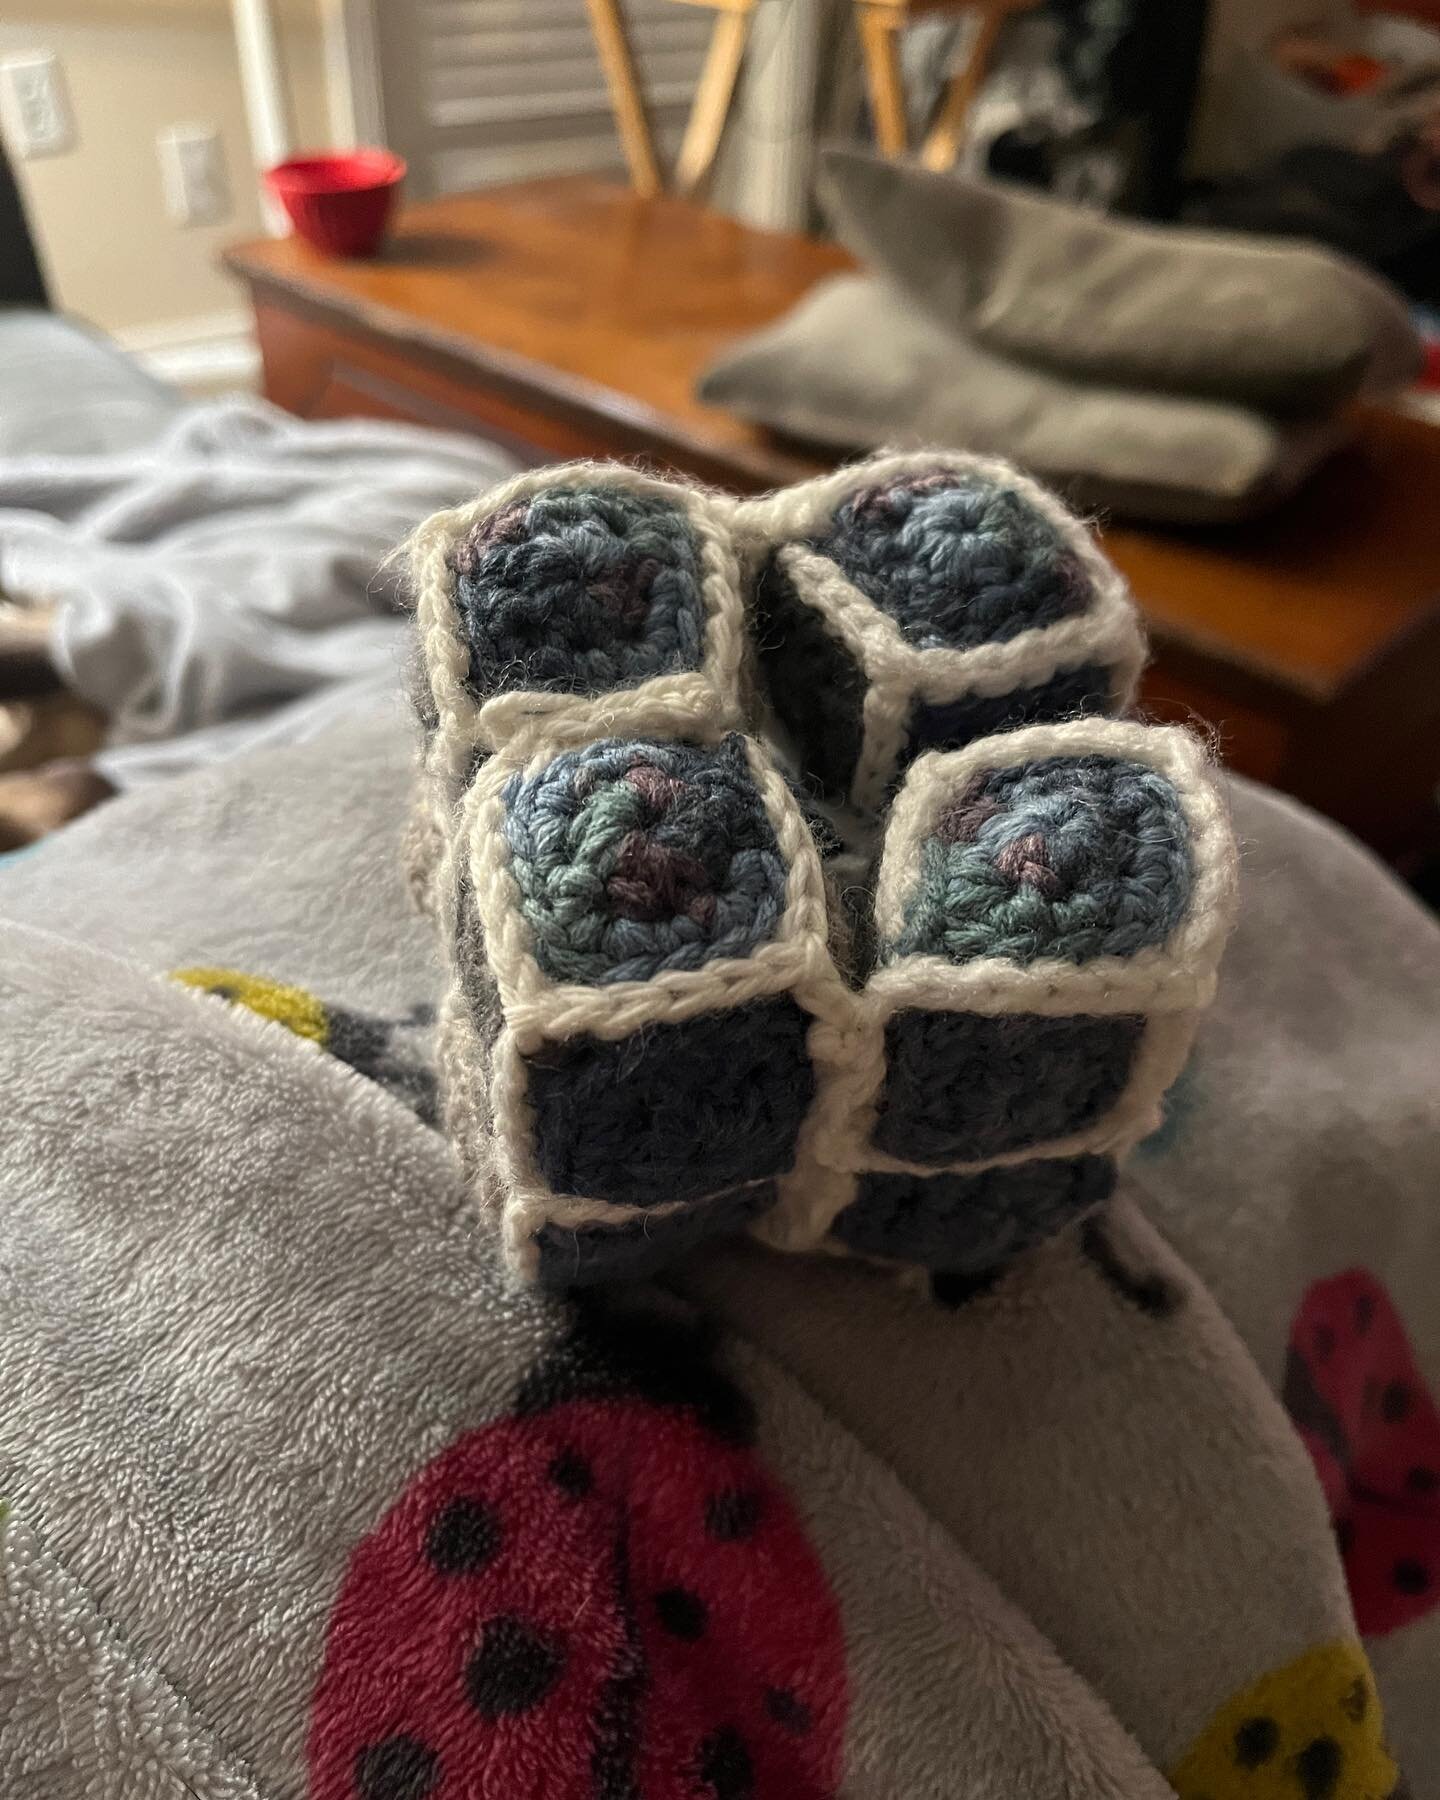 #crochetwithtay life&rsquo;s been a little crazy but I&rsquo;ve managed to make these infinity cubes for my BF and my mom. Each had their own unique challenges but I&rsquo;m pretty happy with how they turned out